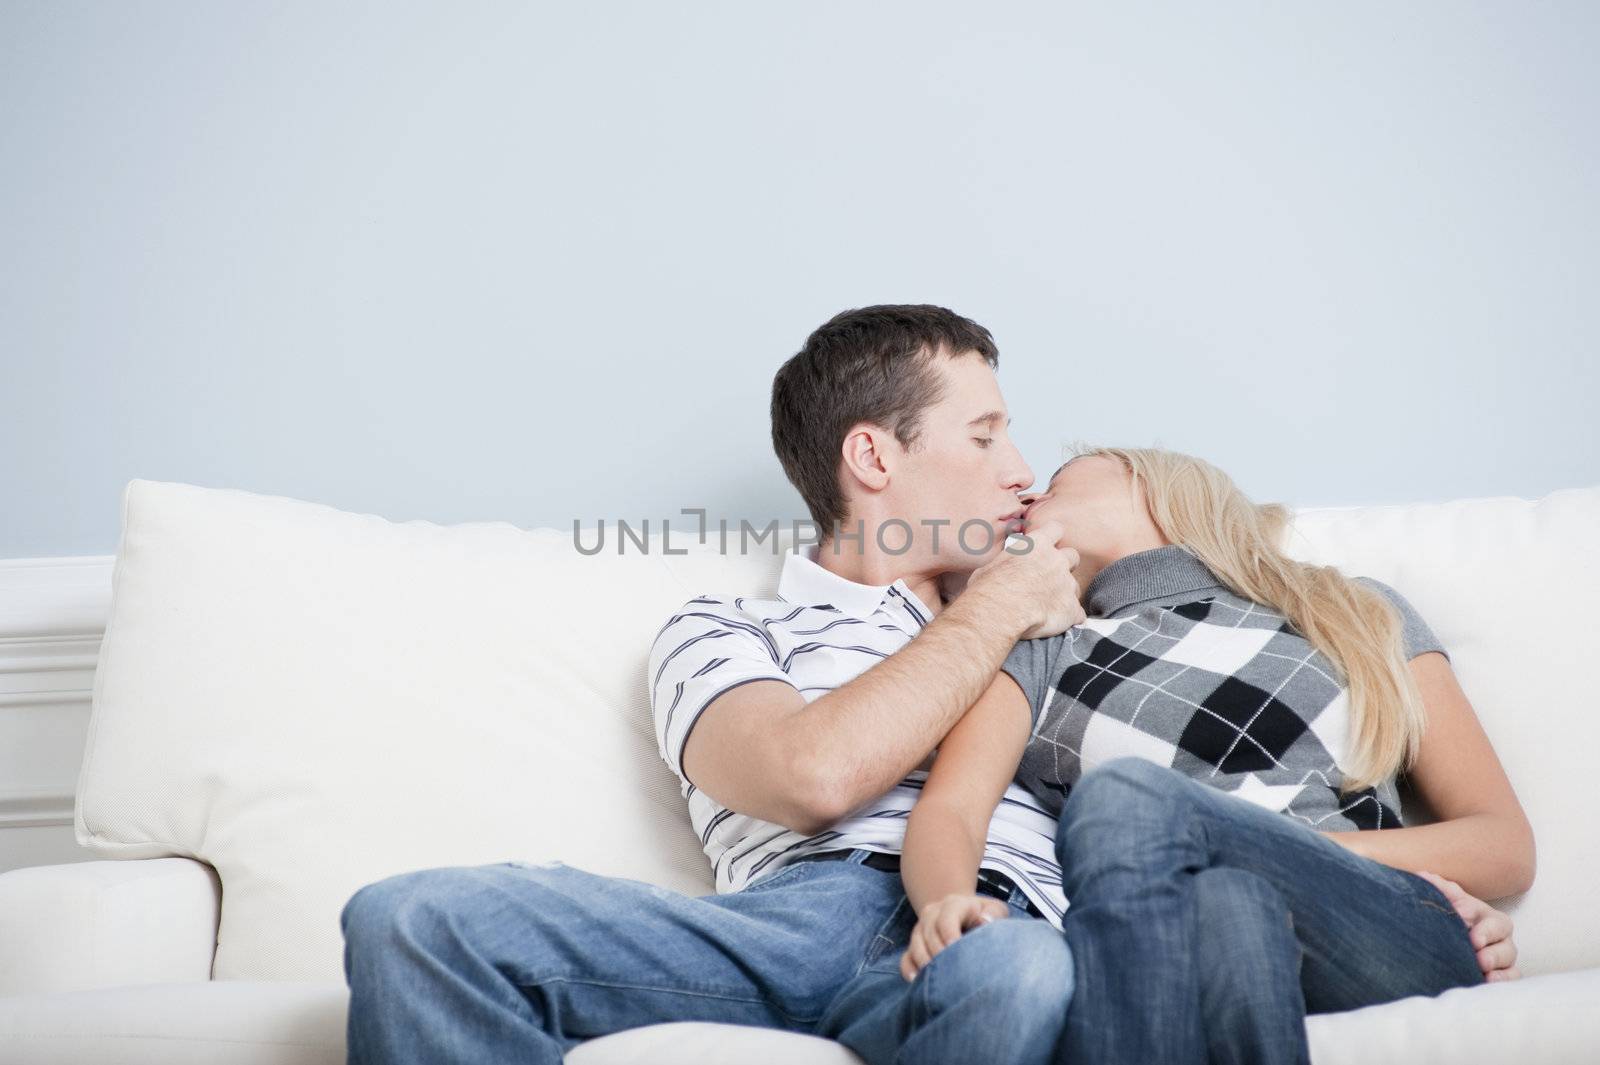 Cropped view of couple sitting on white couch and kissing. Horizontal format.